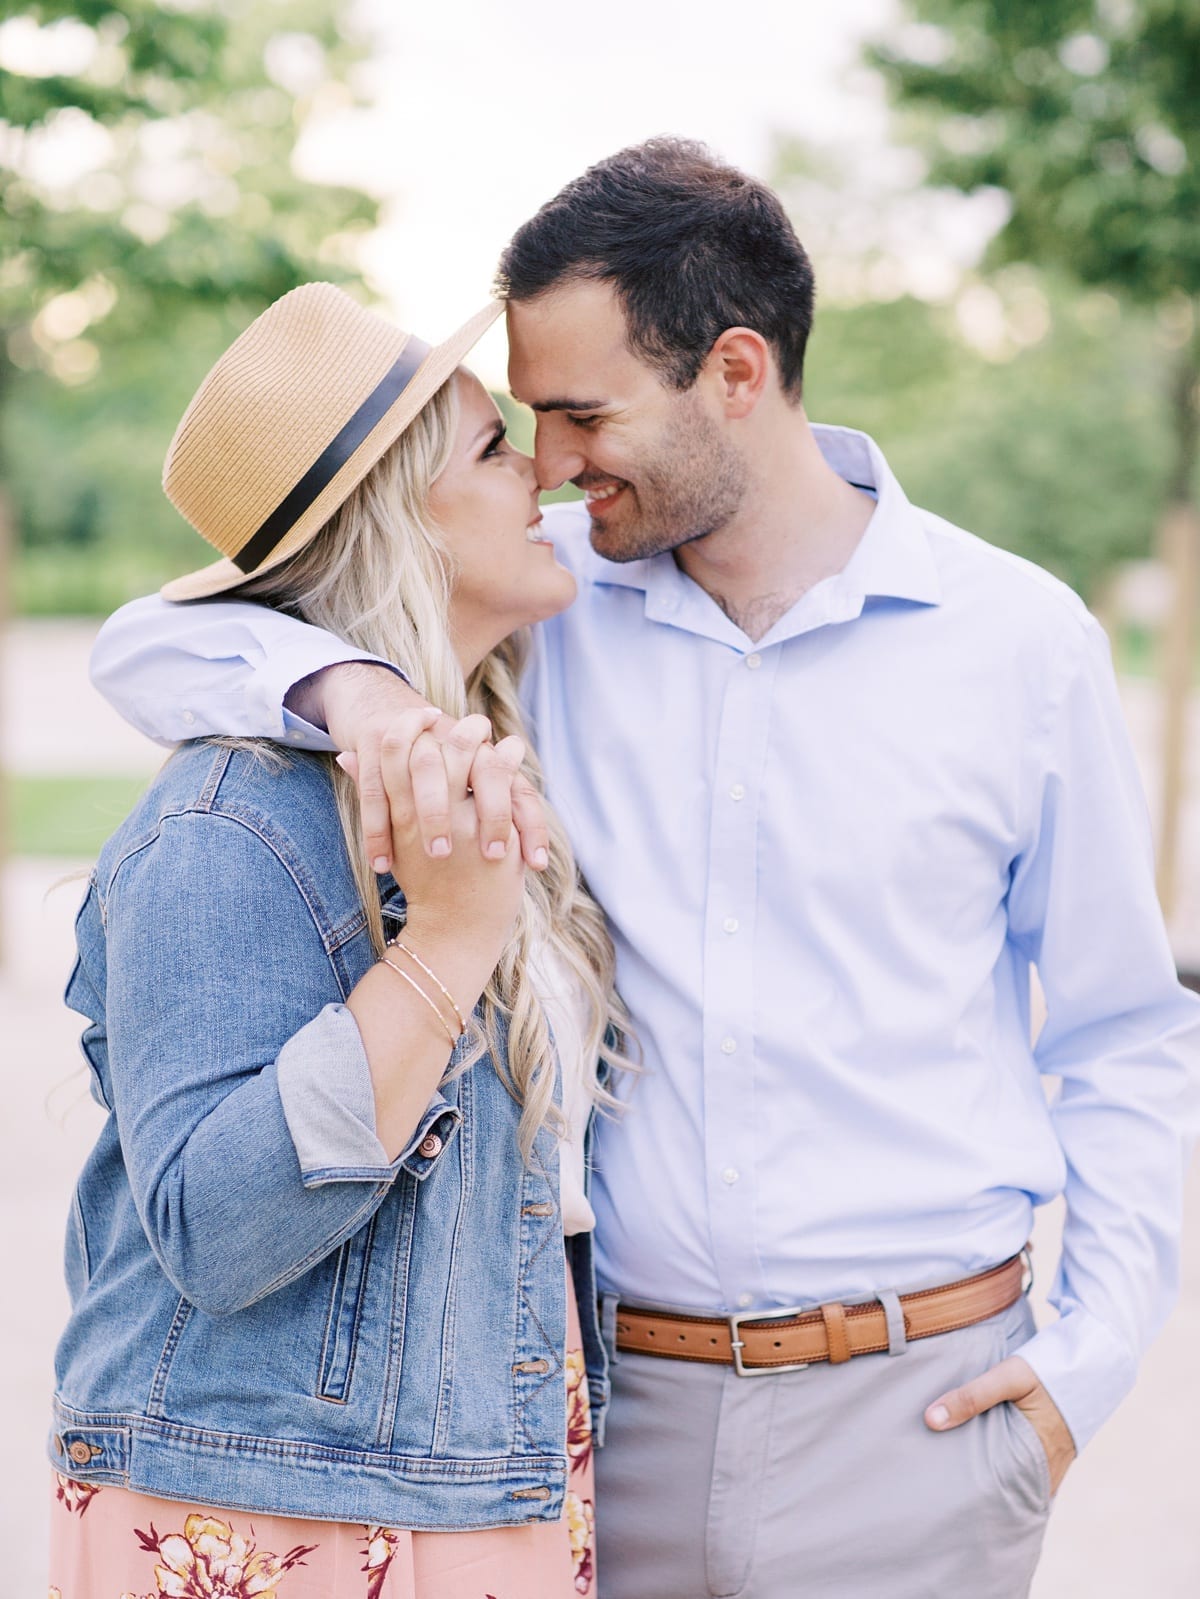 longwood gardens engagement session, stacy hart_0476